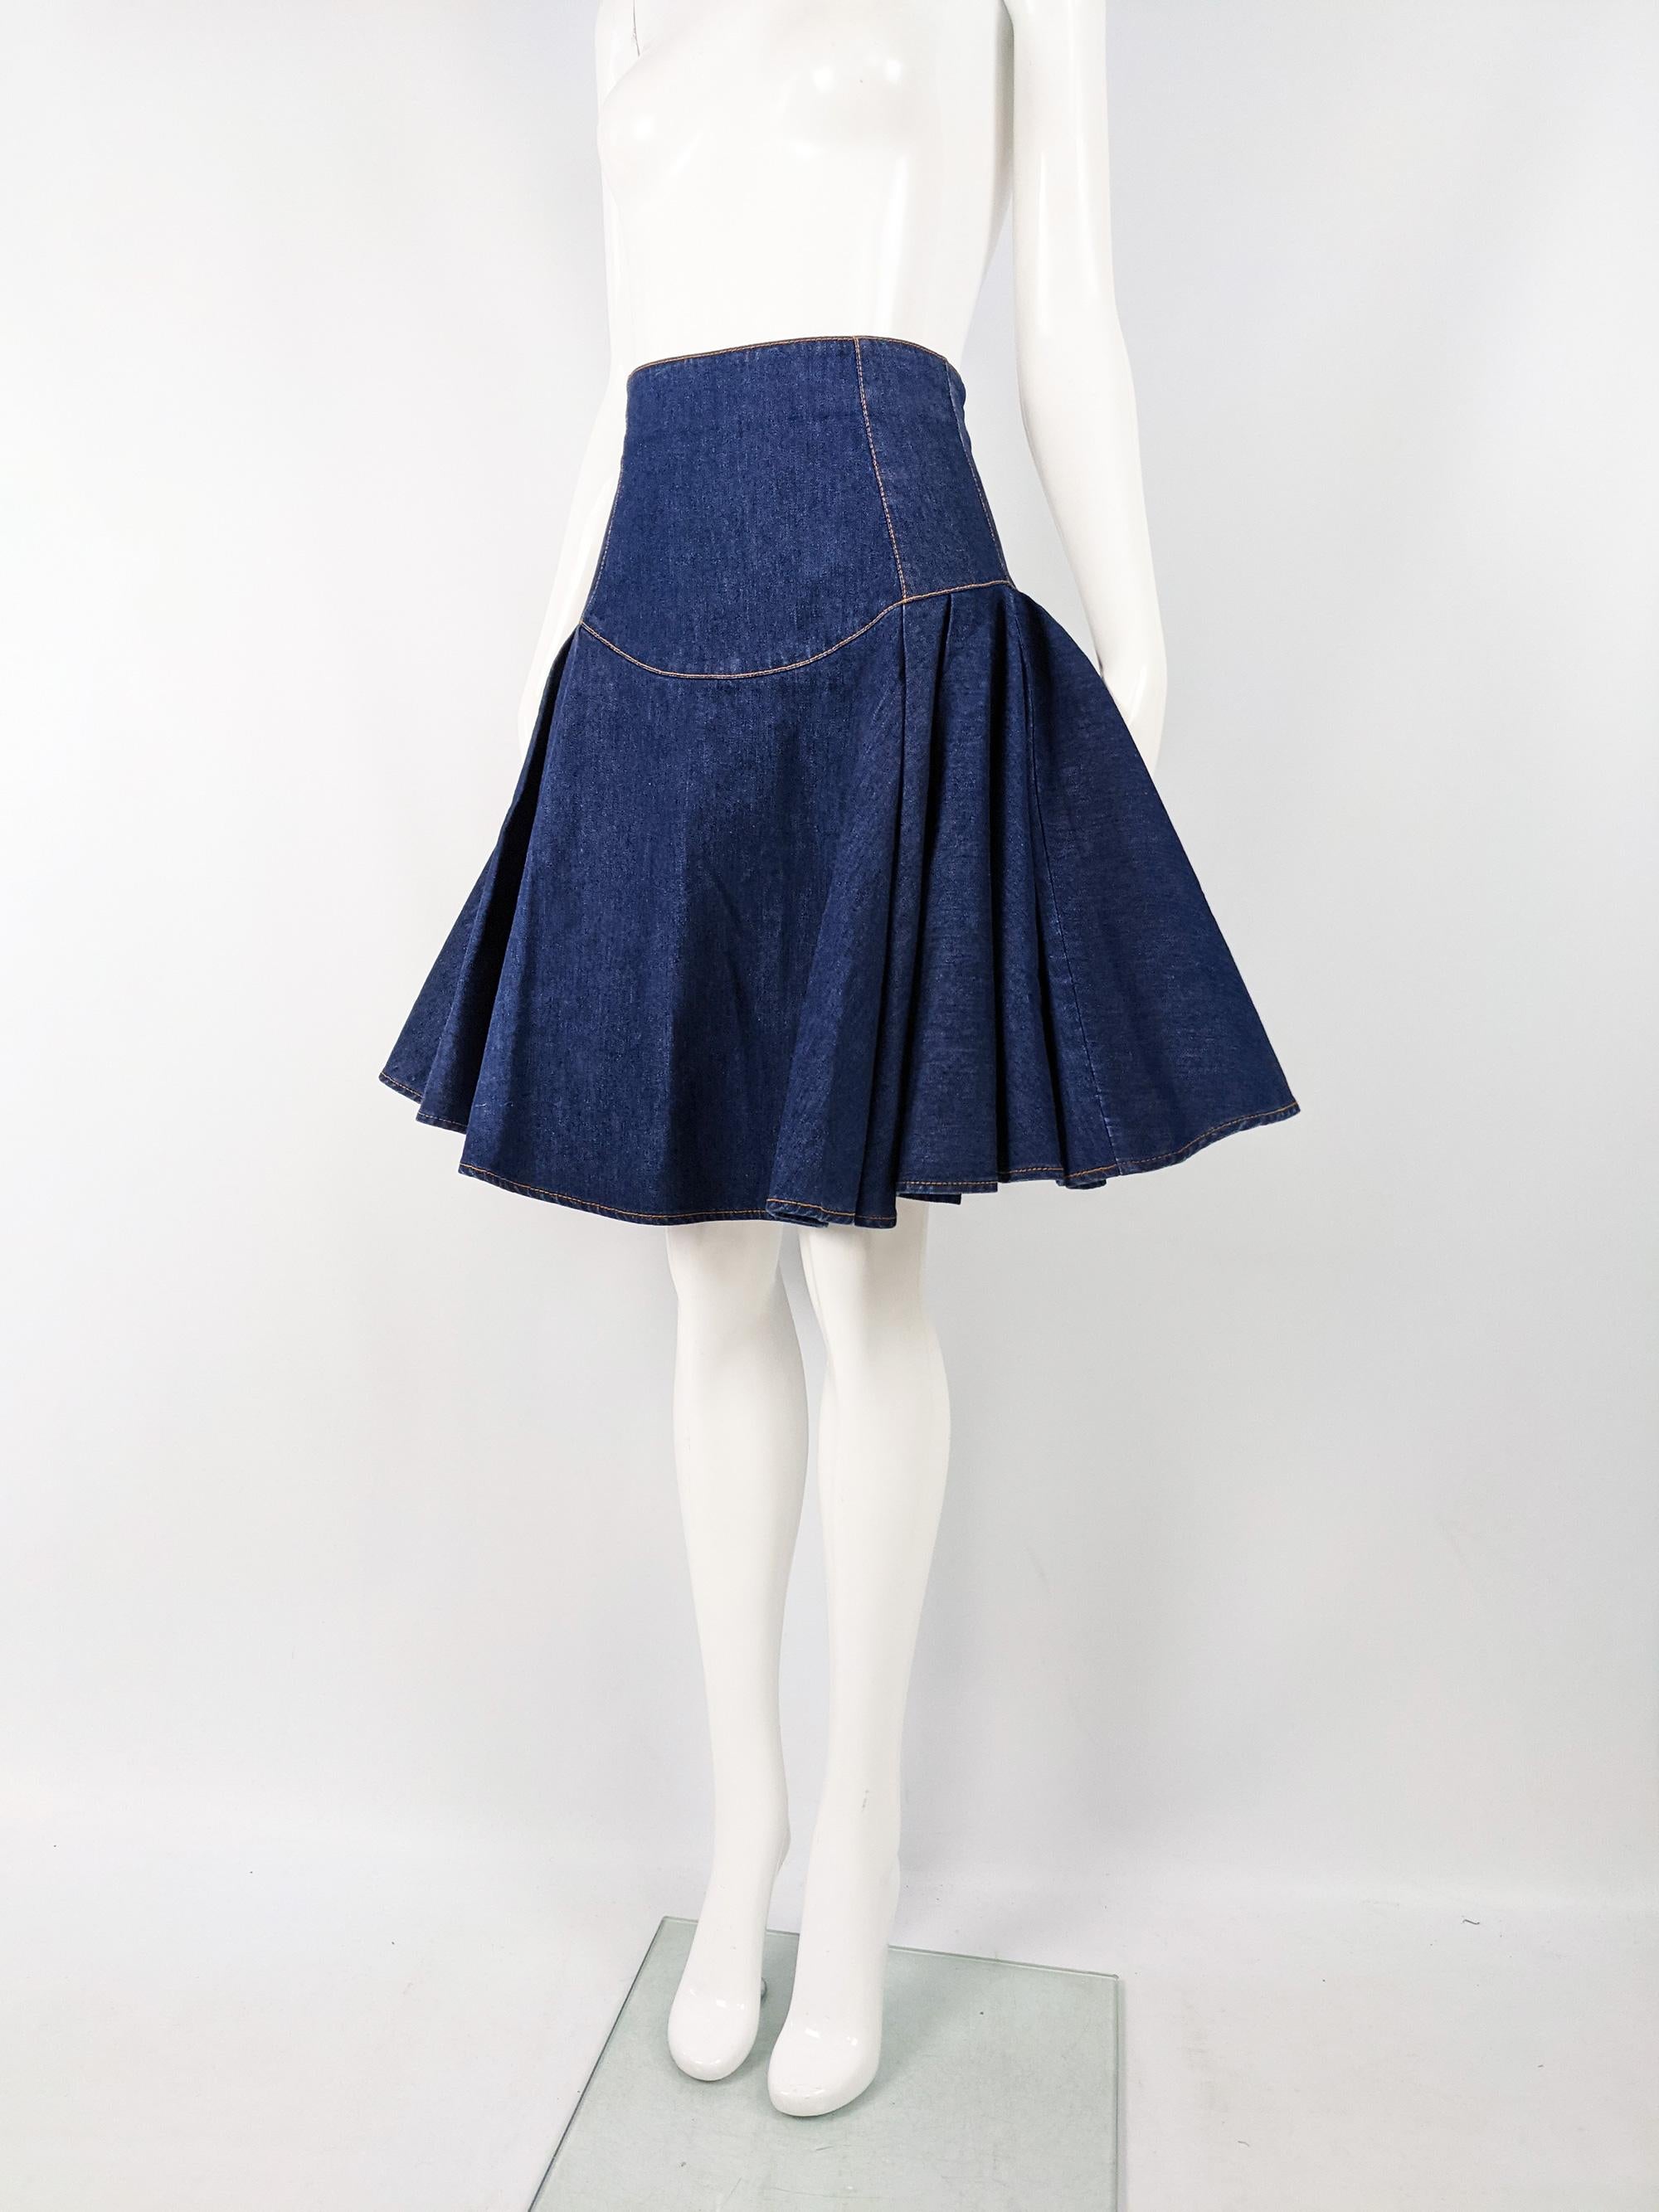 Alexander McQueen Blue Denim Flared Skirt In Excellent Condition For Sale In Doncaster, South Yorkshire